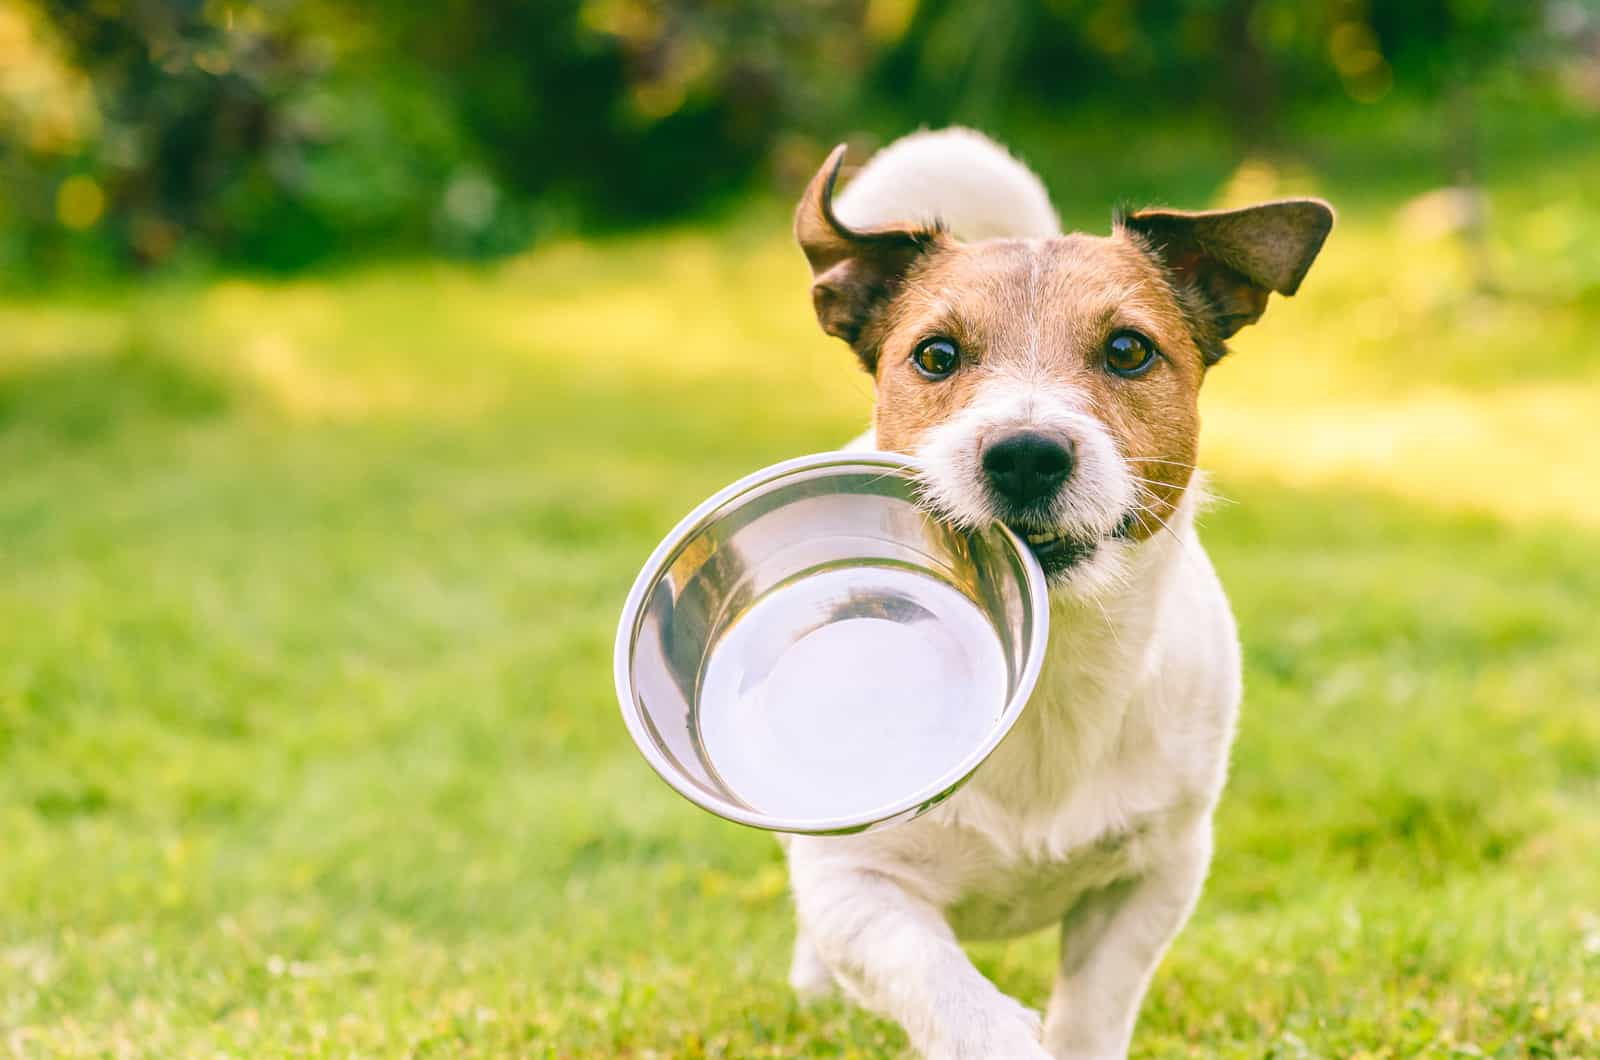 dog running outside with bowl in his mouth